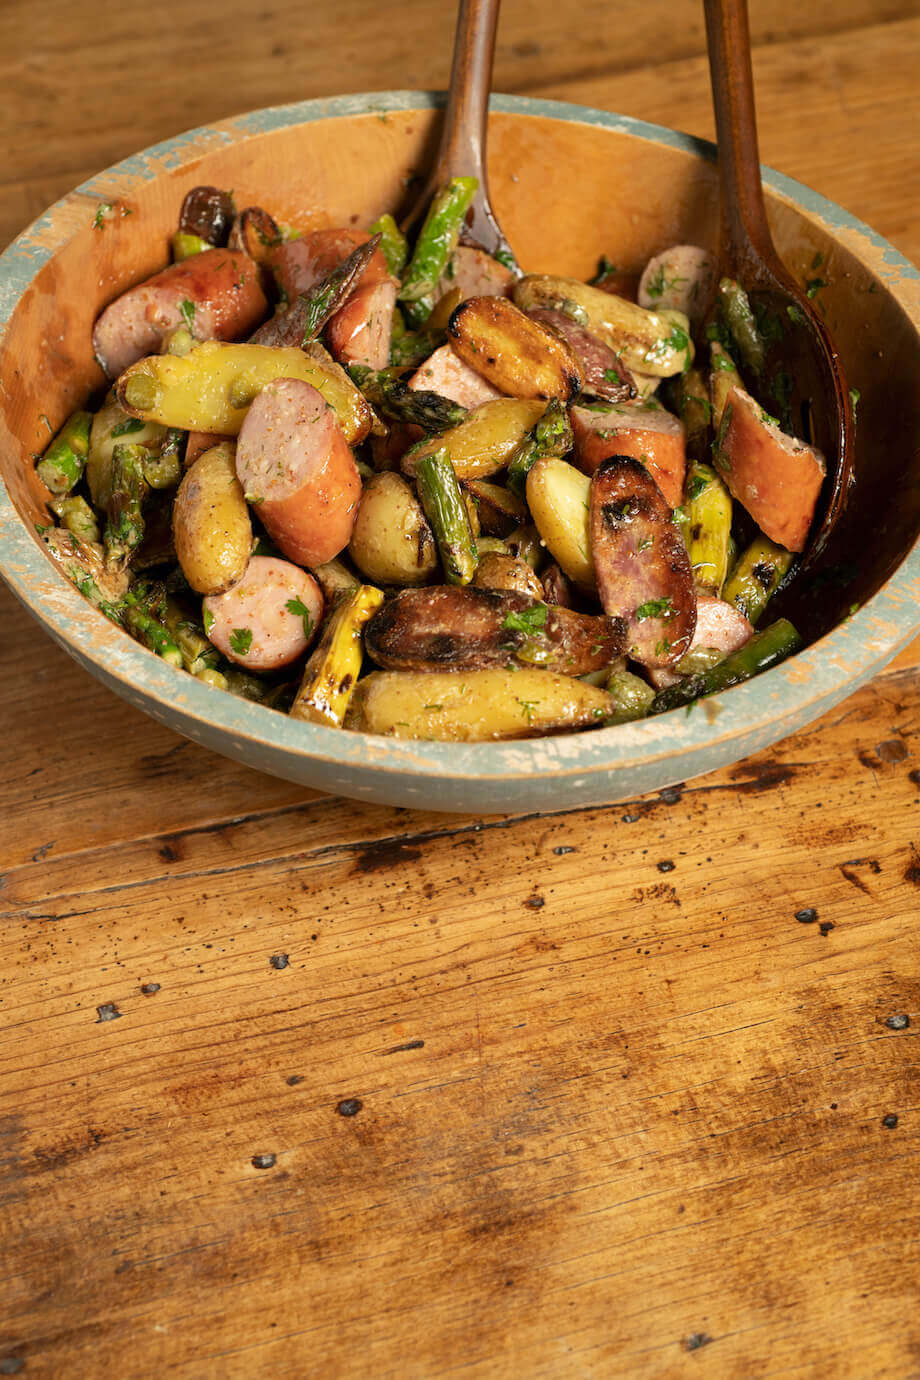 Kielbasa and roasted vegetables in a bowl